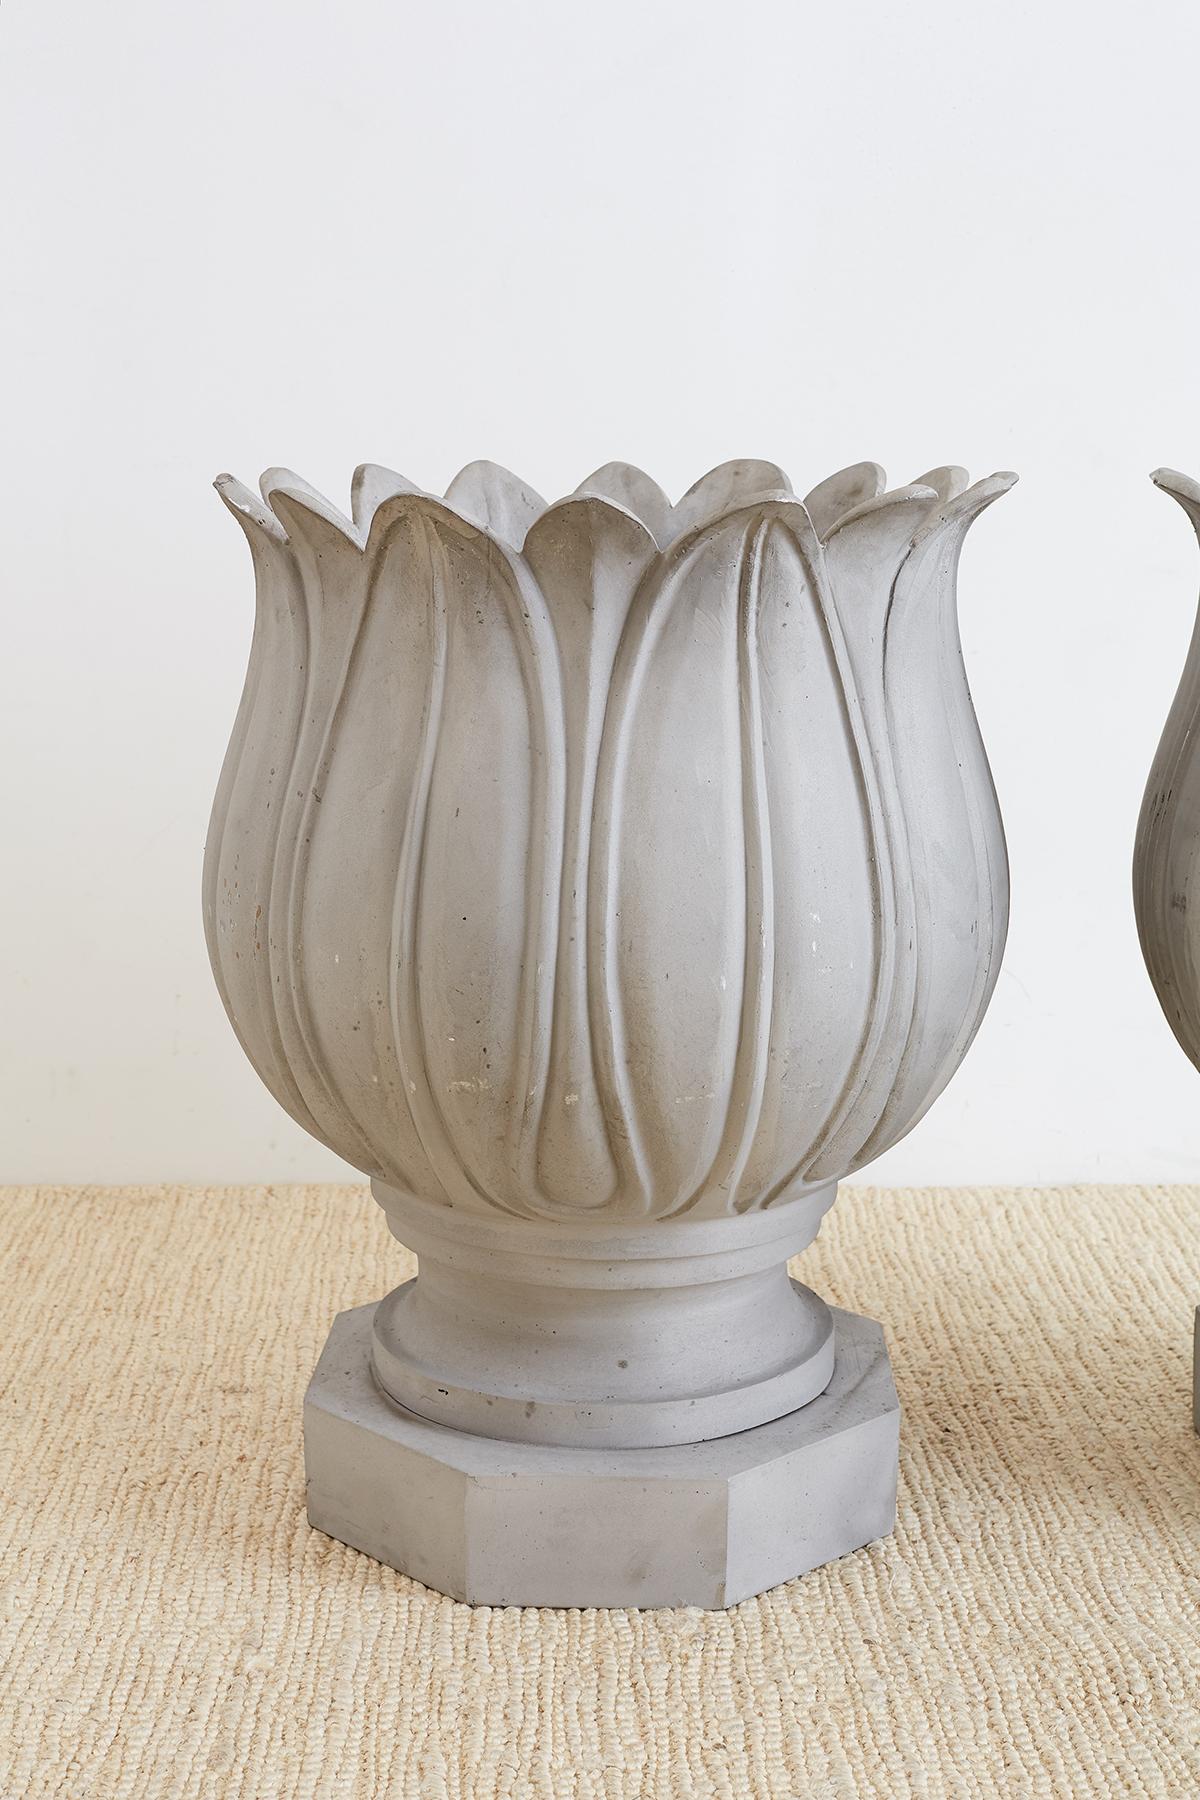 Fantastic pair of large neoclassical garden urns in the form of tulips. These planters or jardinières are constructed from thick aluminum hand-formed by a foundry in Los Angeles, CA. Mounted on octagonal plinths. Beautifully molded petals on the